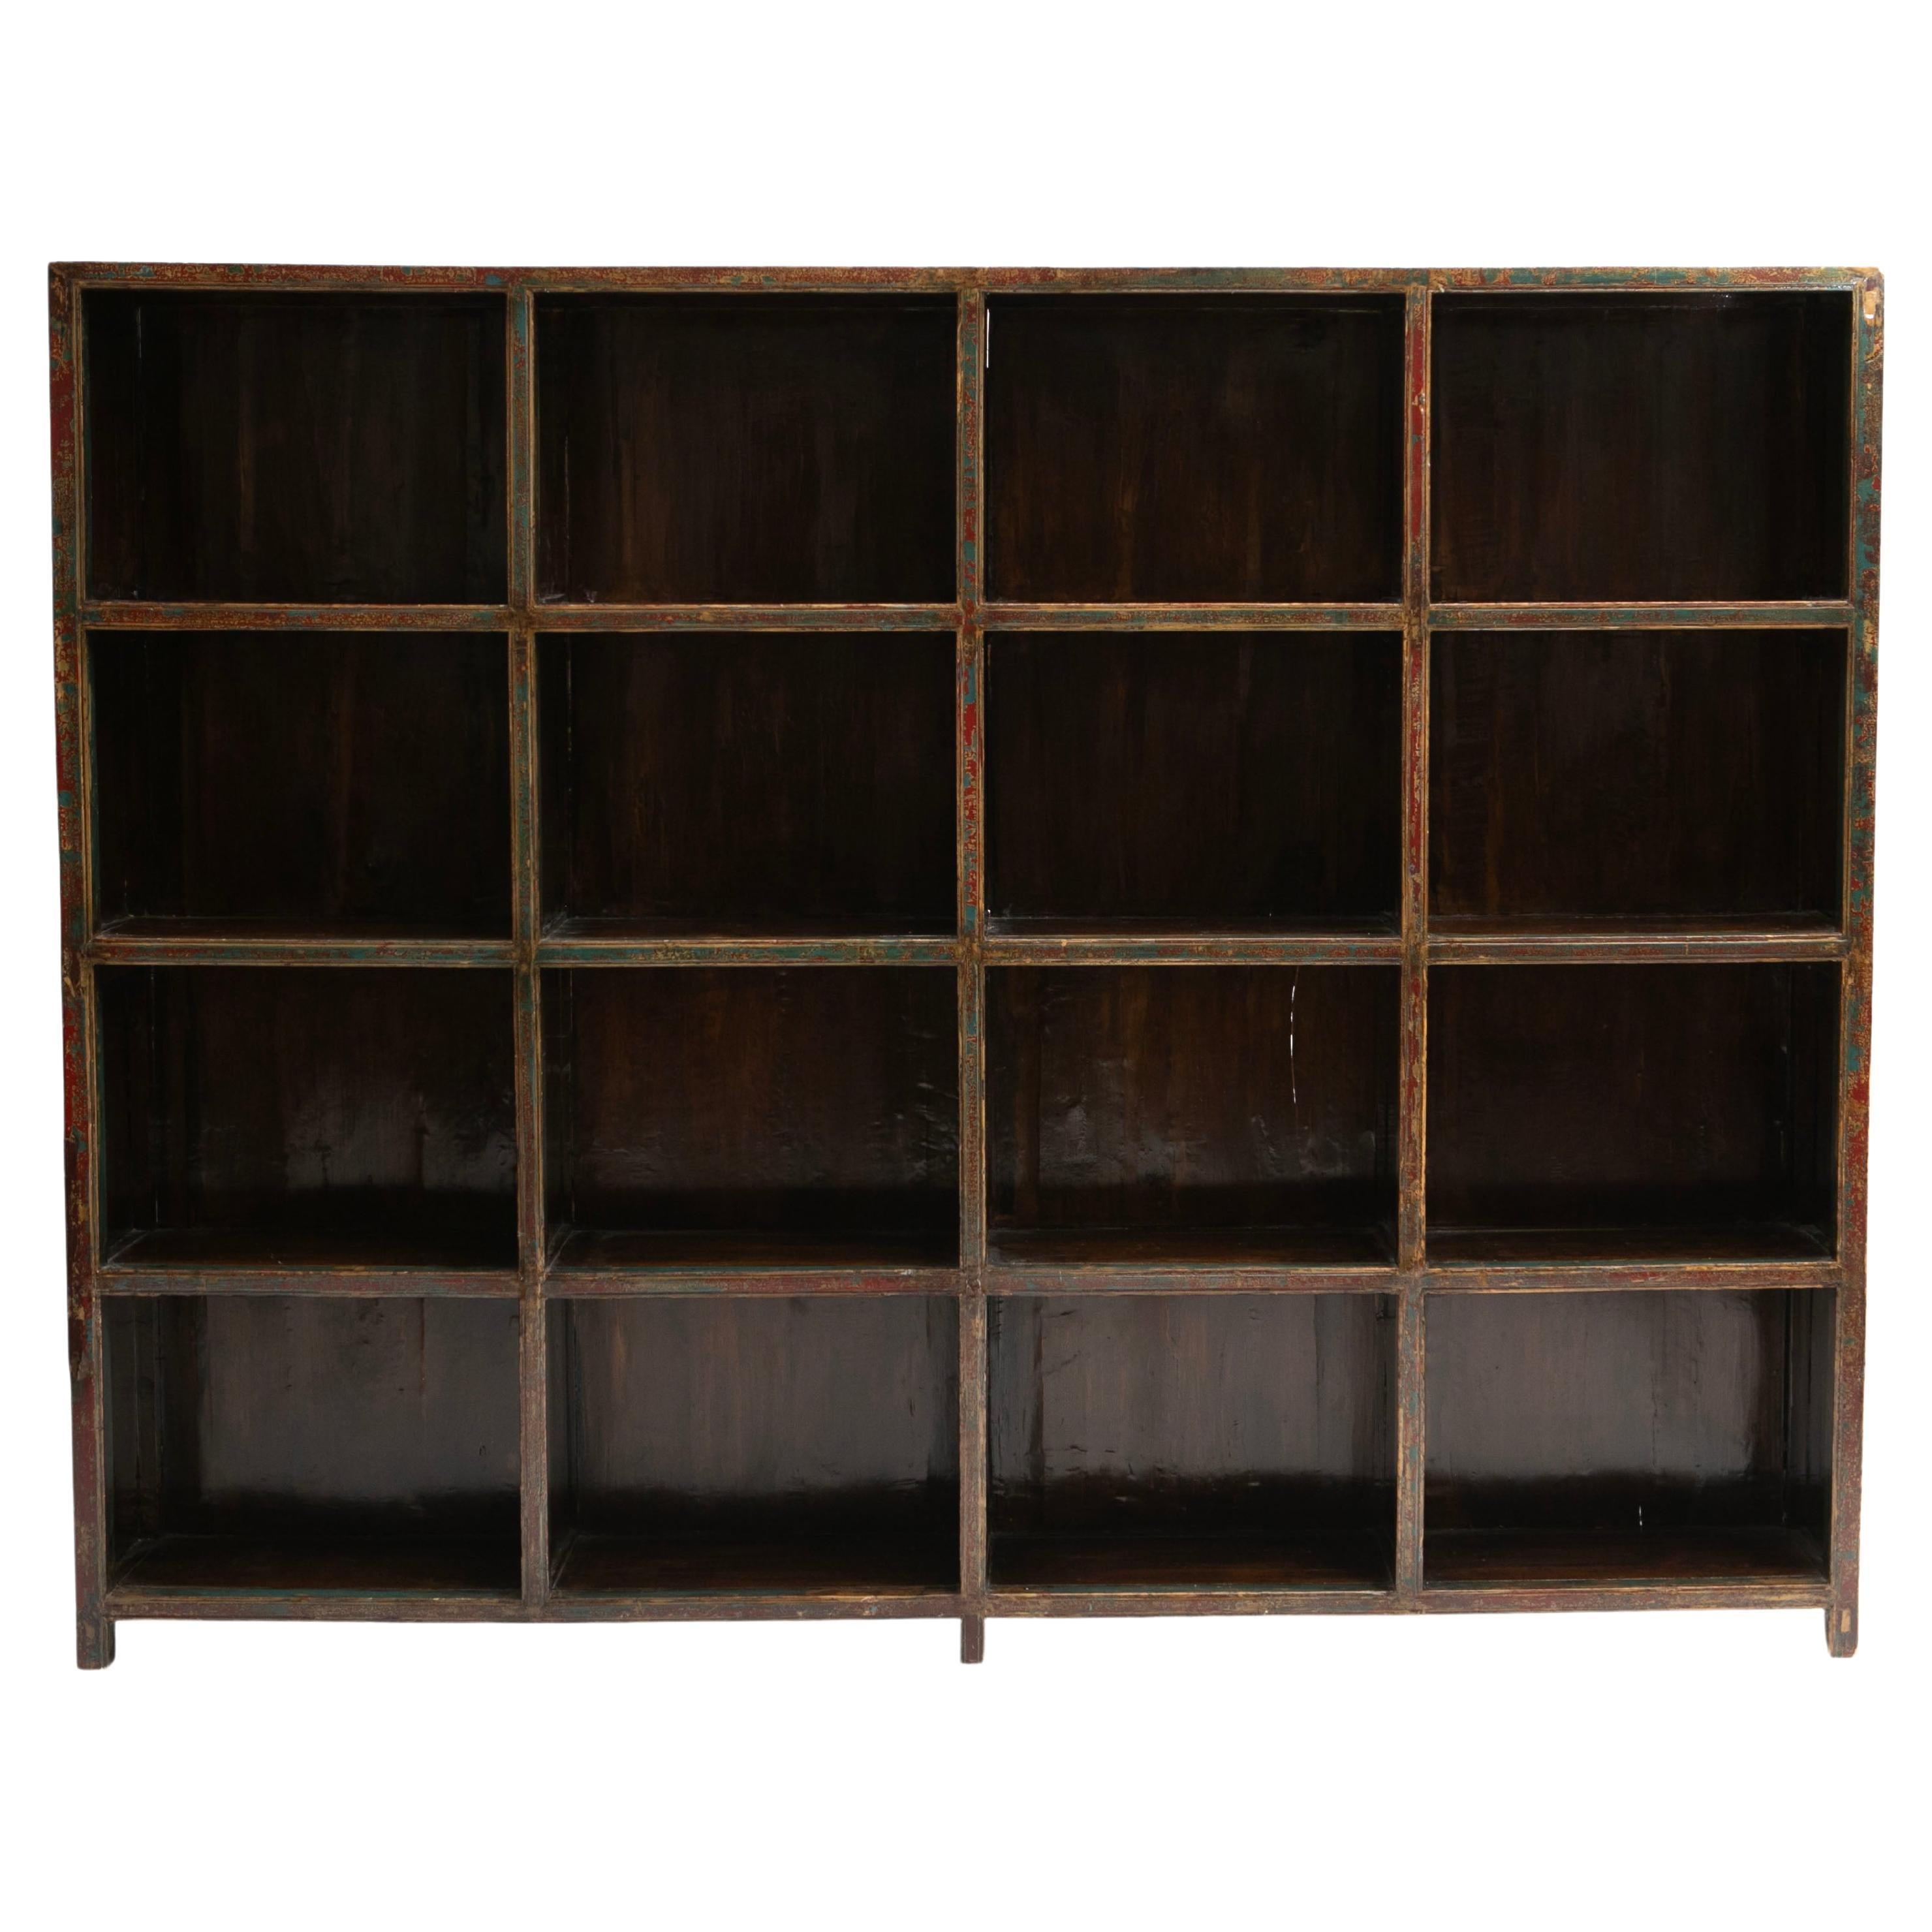 A large early 20th-century  Lacquered Elm Wood Bookcase 